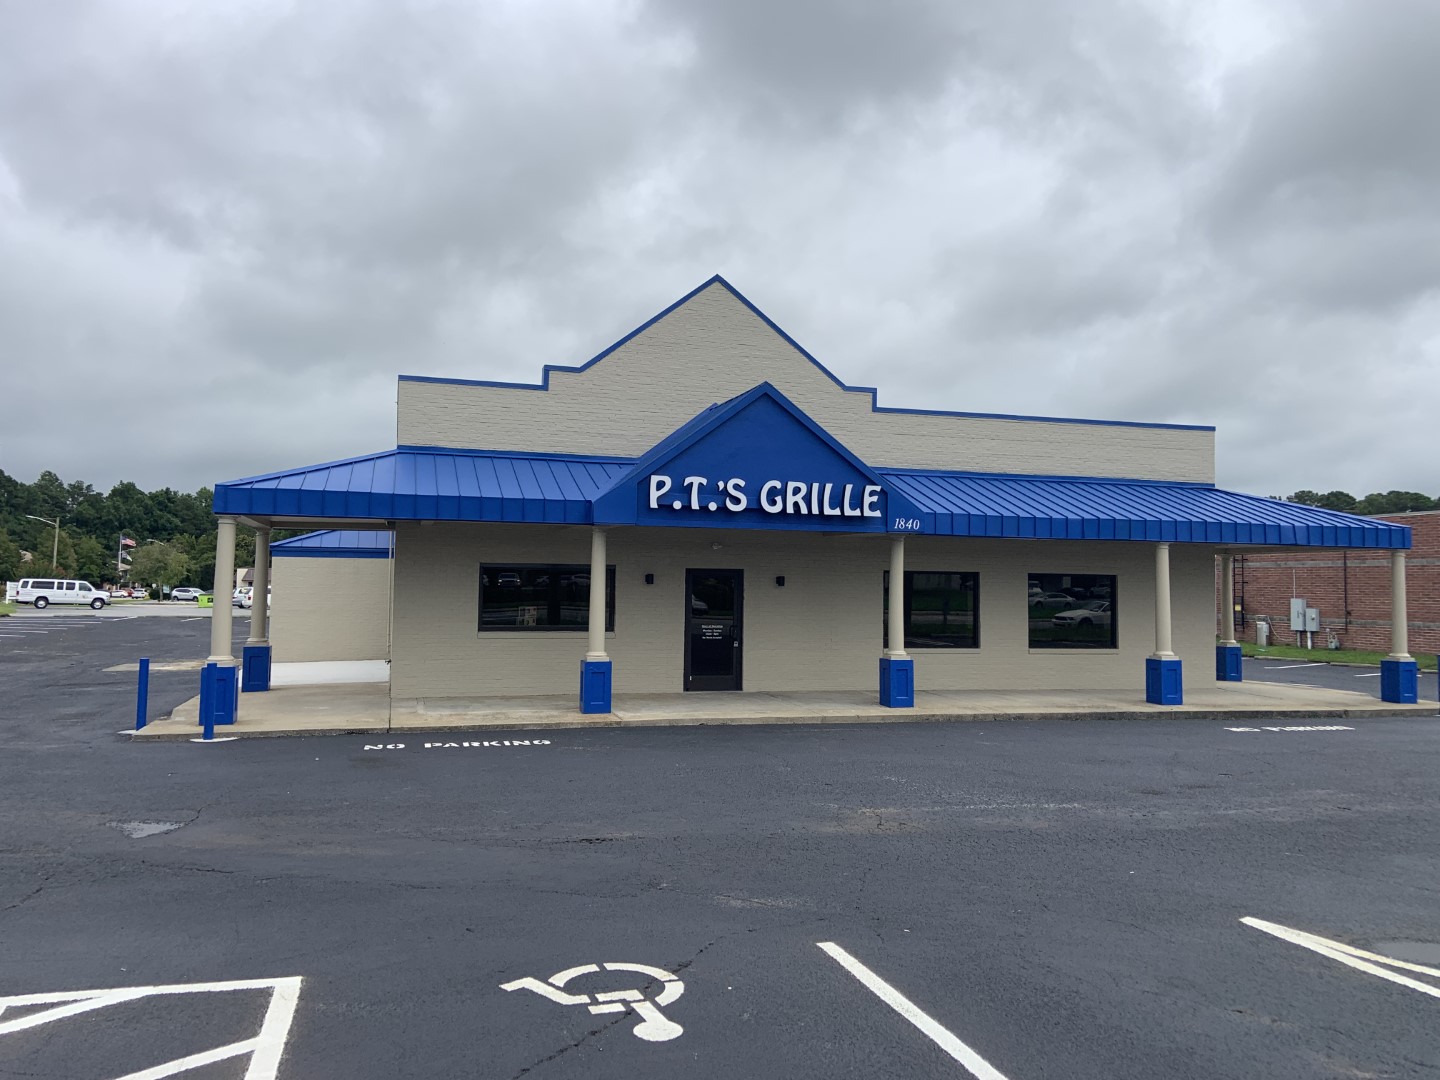 P.T.’s Grille